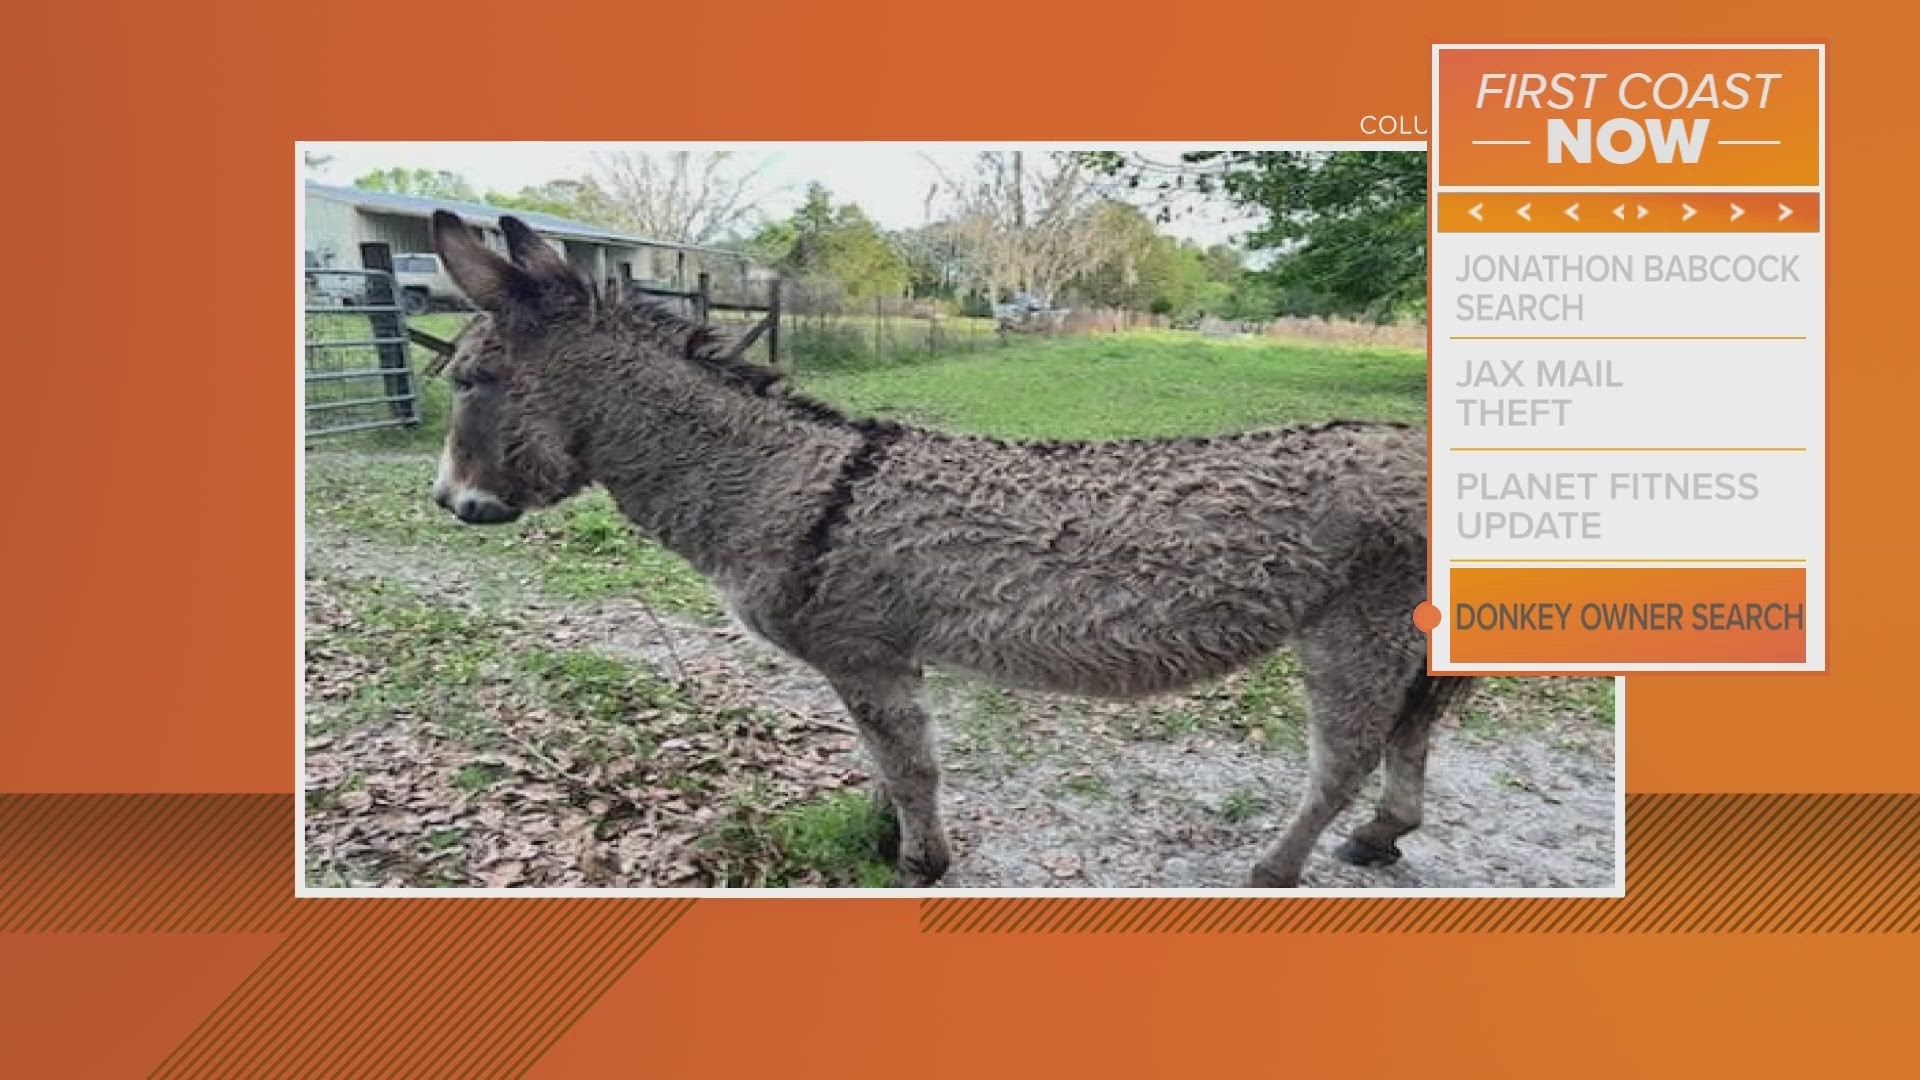 The donkey was found near Moore Road on Monday, according to the sheriff's office.